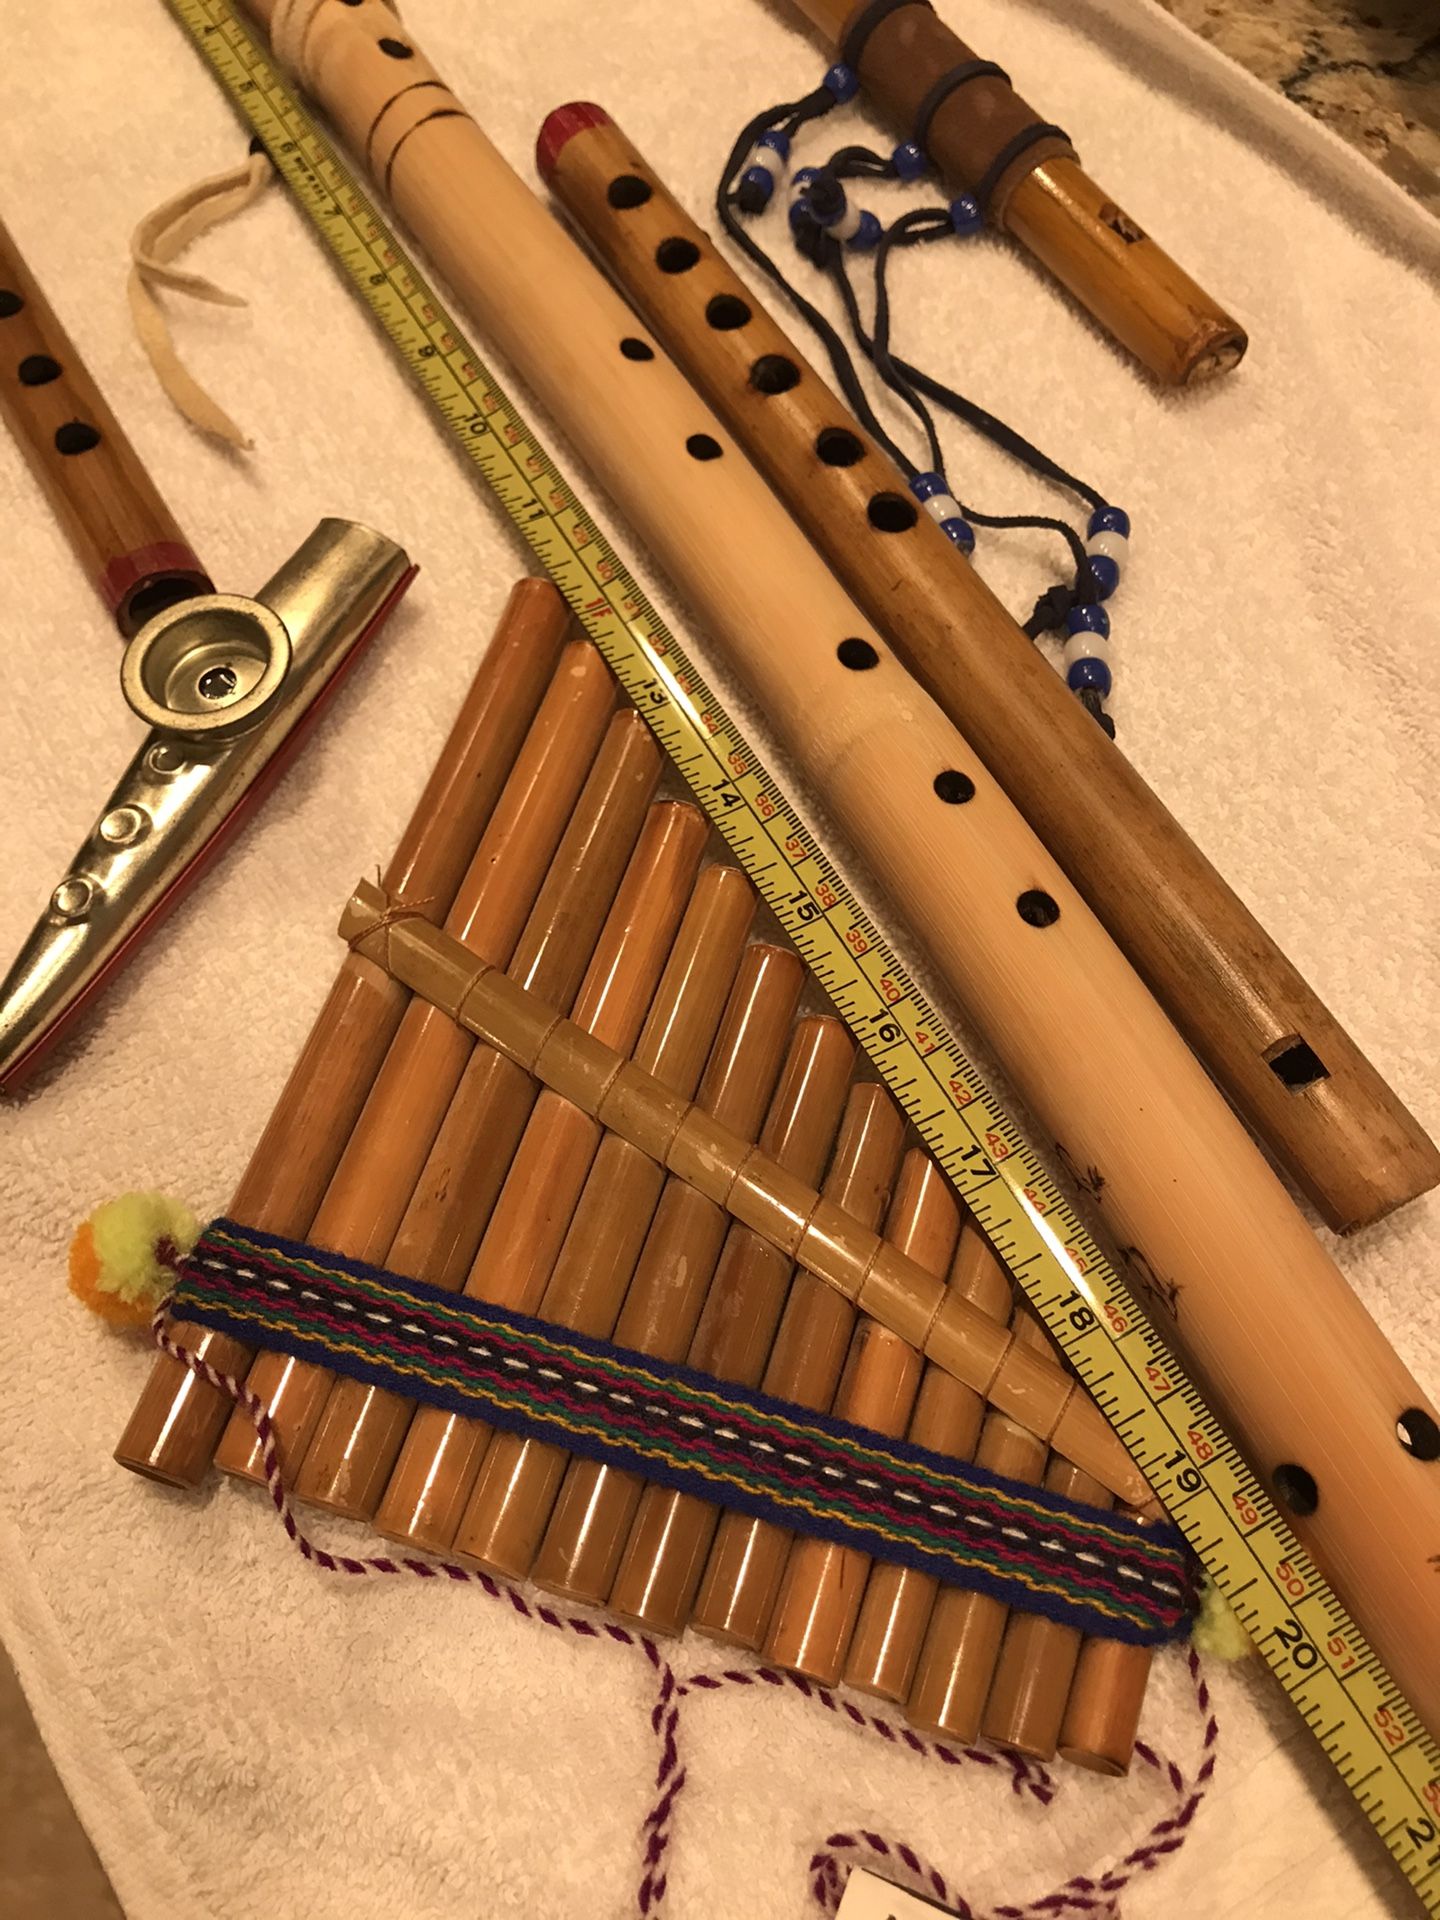 $5 for ALL Music Instruments SCROLL PICTURES